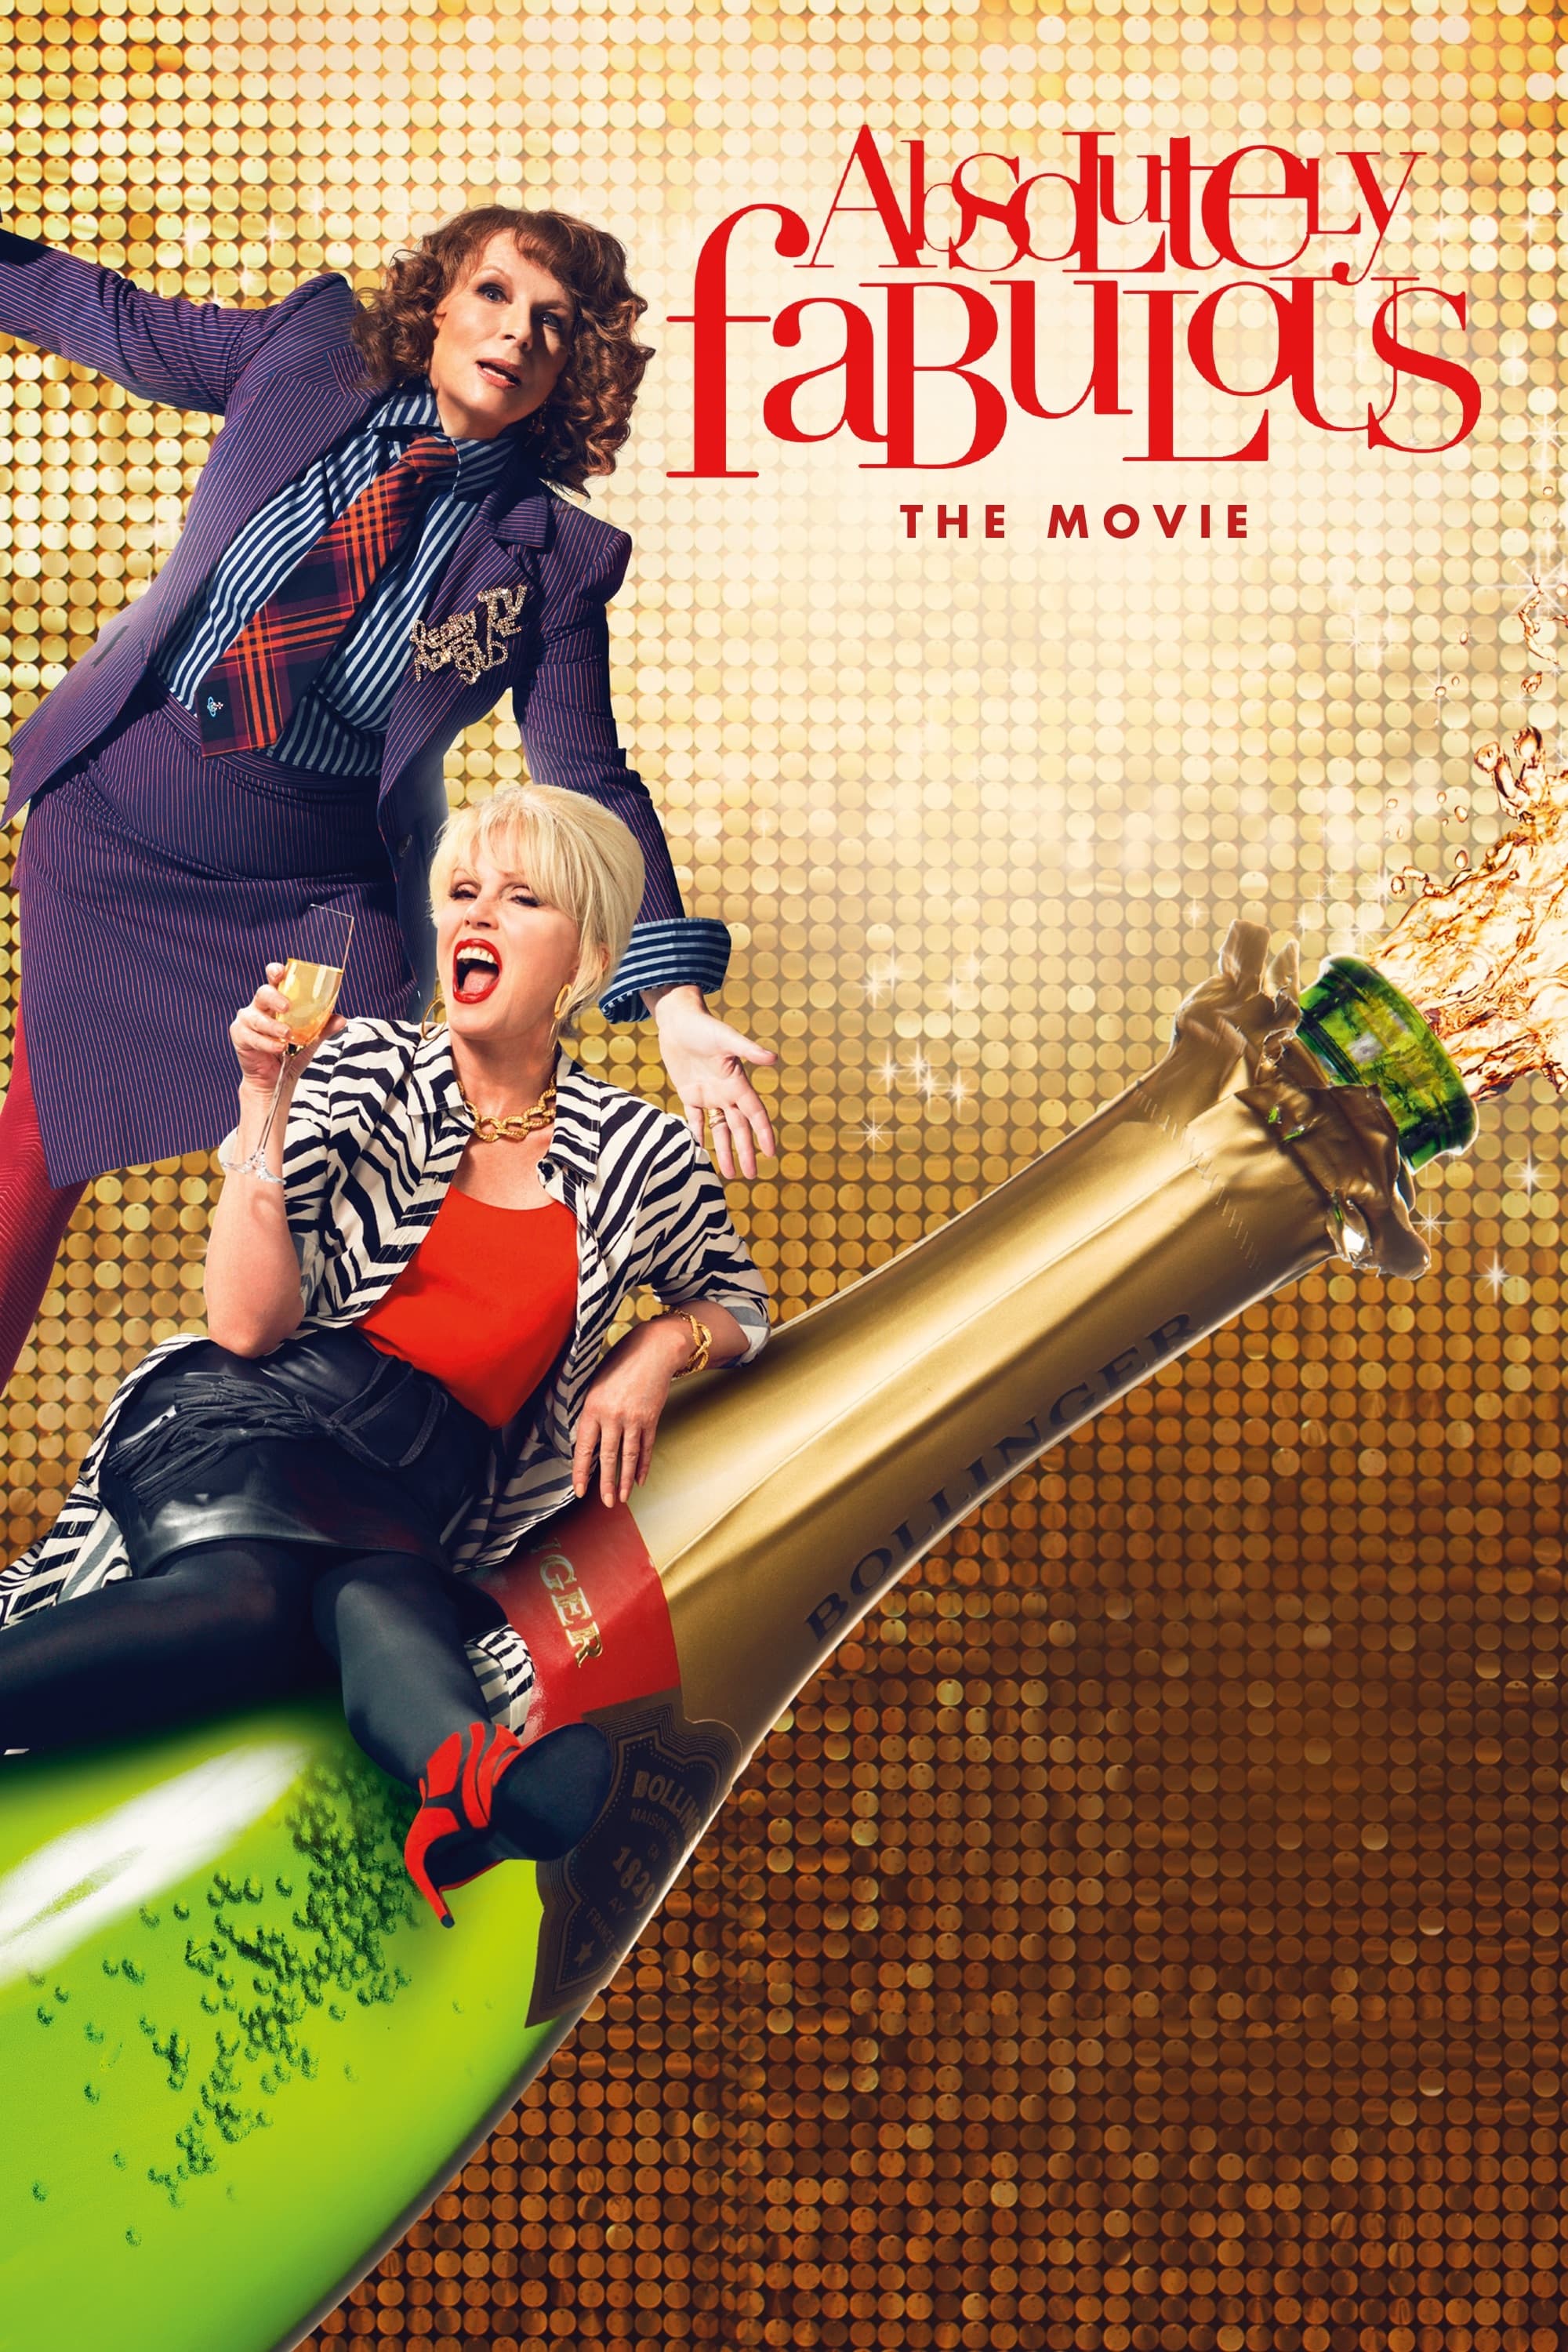 Banner Phim Tột Cùng Sang Chảnh (Absolutely Fabulous: The Movie)